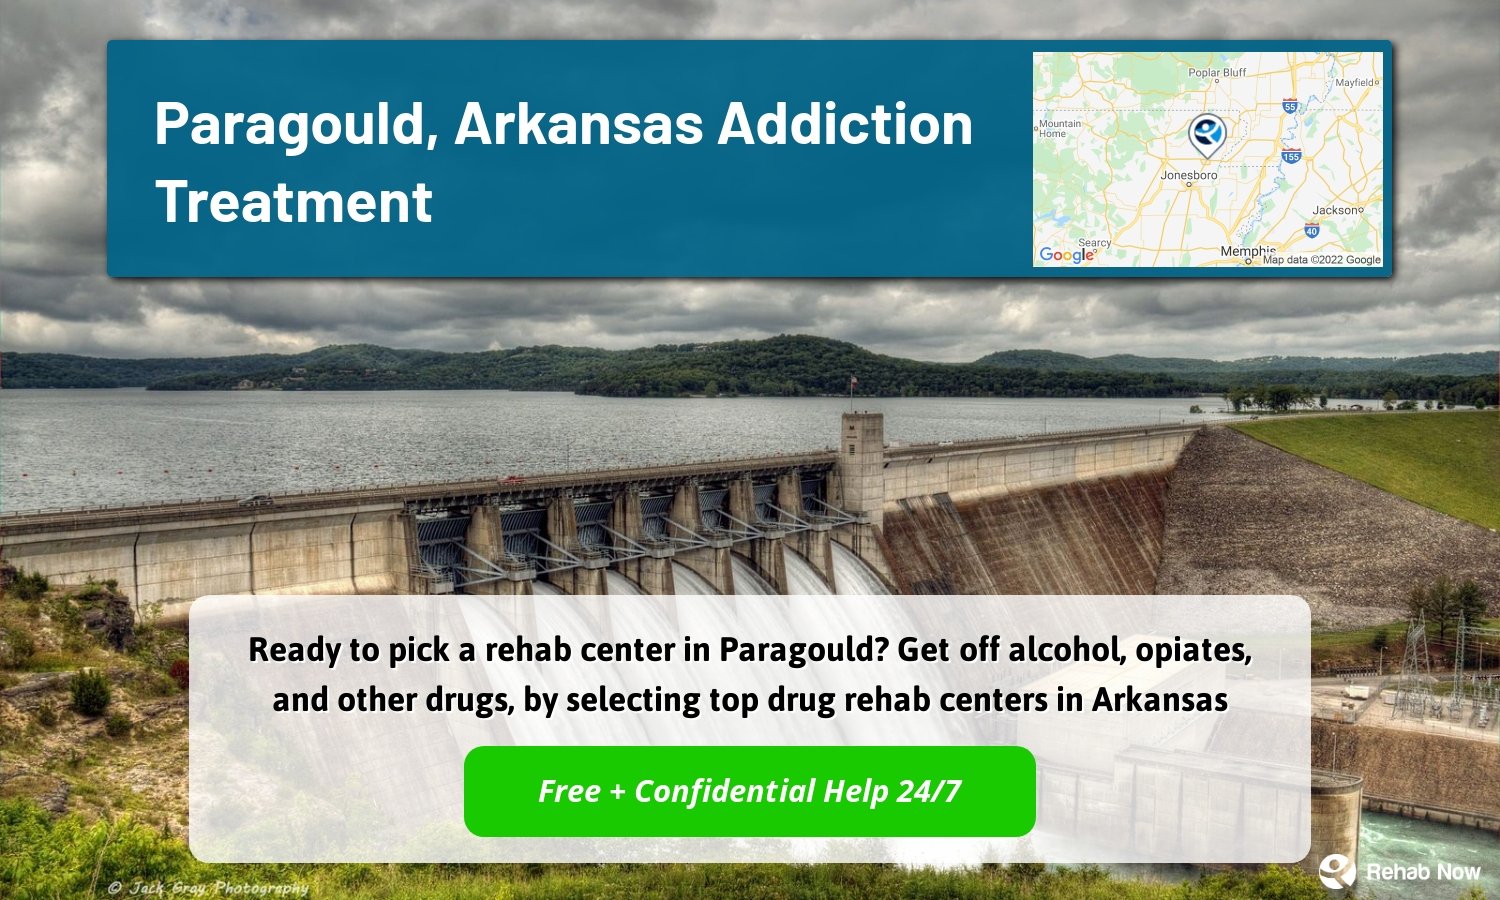 Ready to pick a rehab center in Paragould? Get off alcohol, opiates, and other drugs, by selecting top drug rehab centers in Arkansas